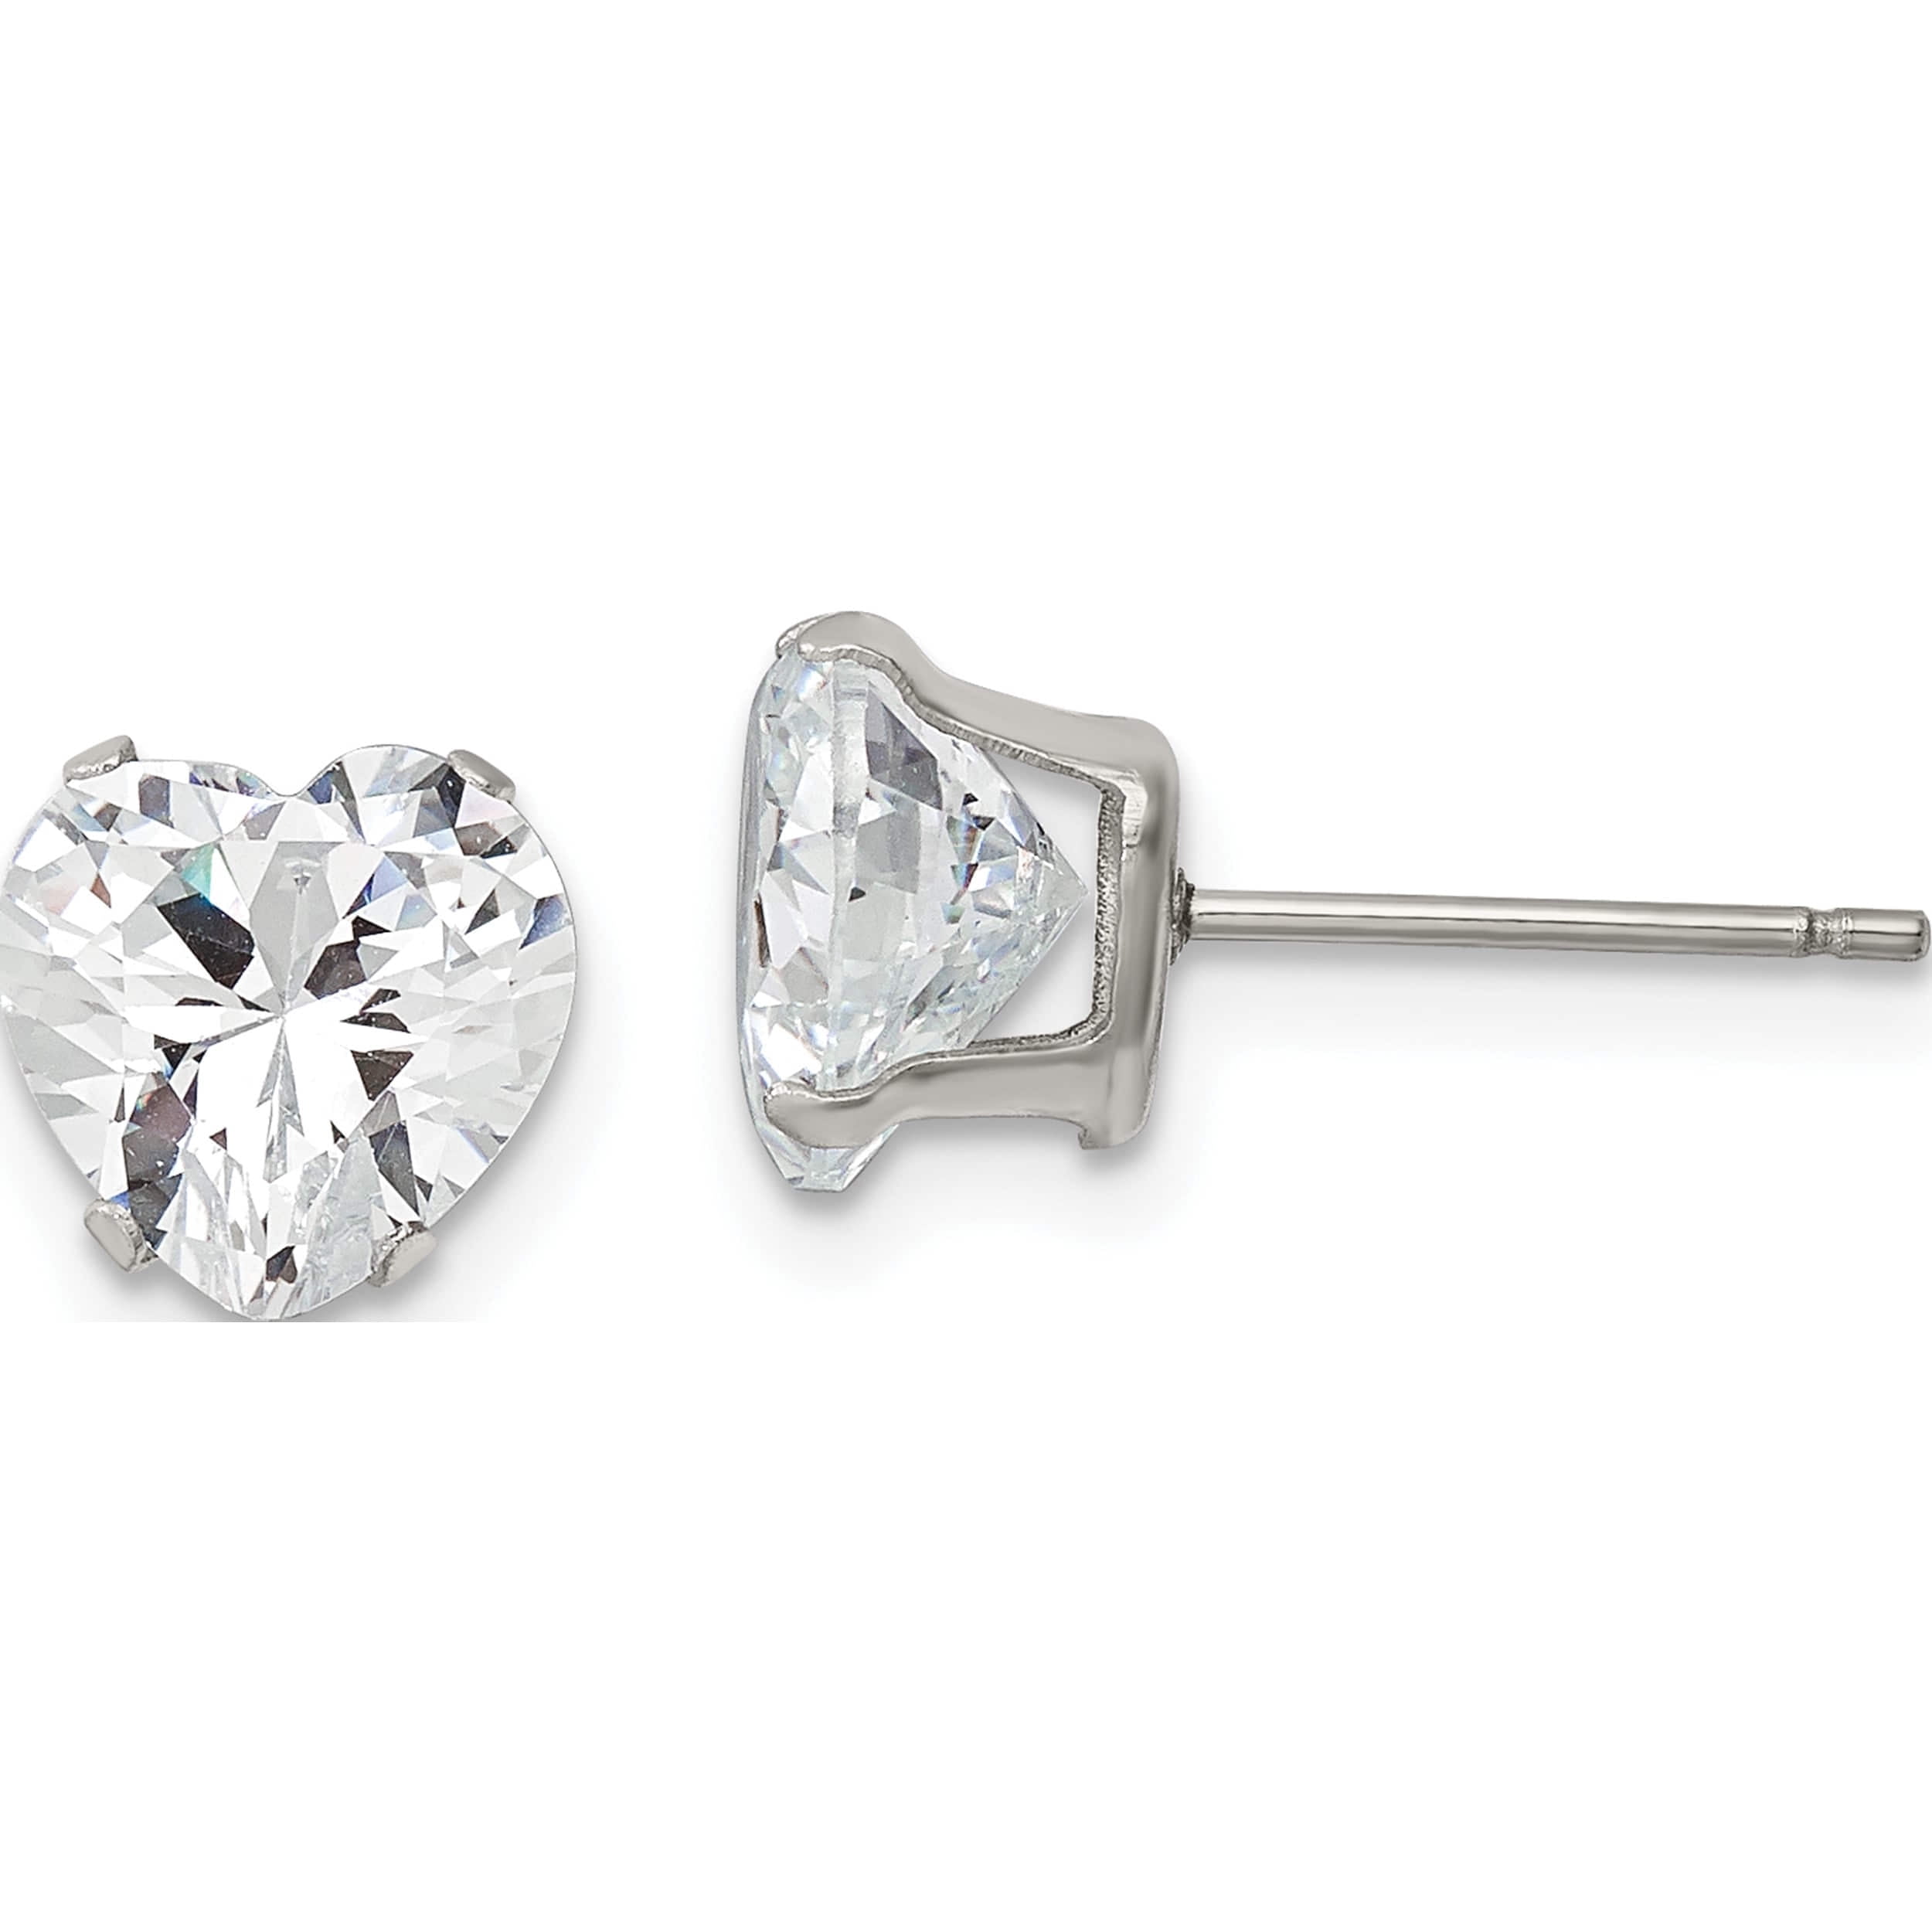 Stainless Steel Polished 8mm Heart Cz Stud Post Earrings (8.19 X 7.9) Made  In China sre1079